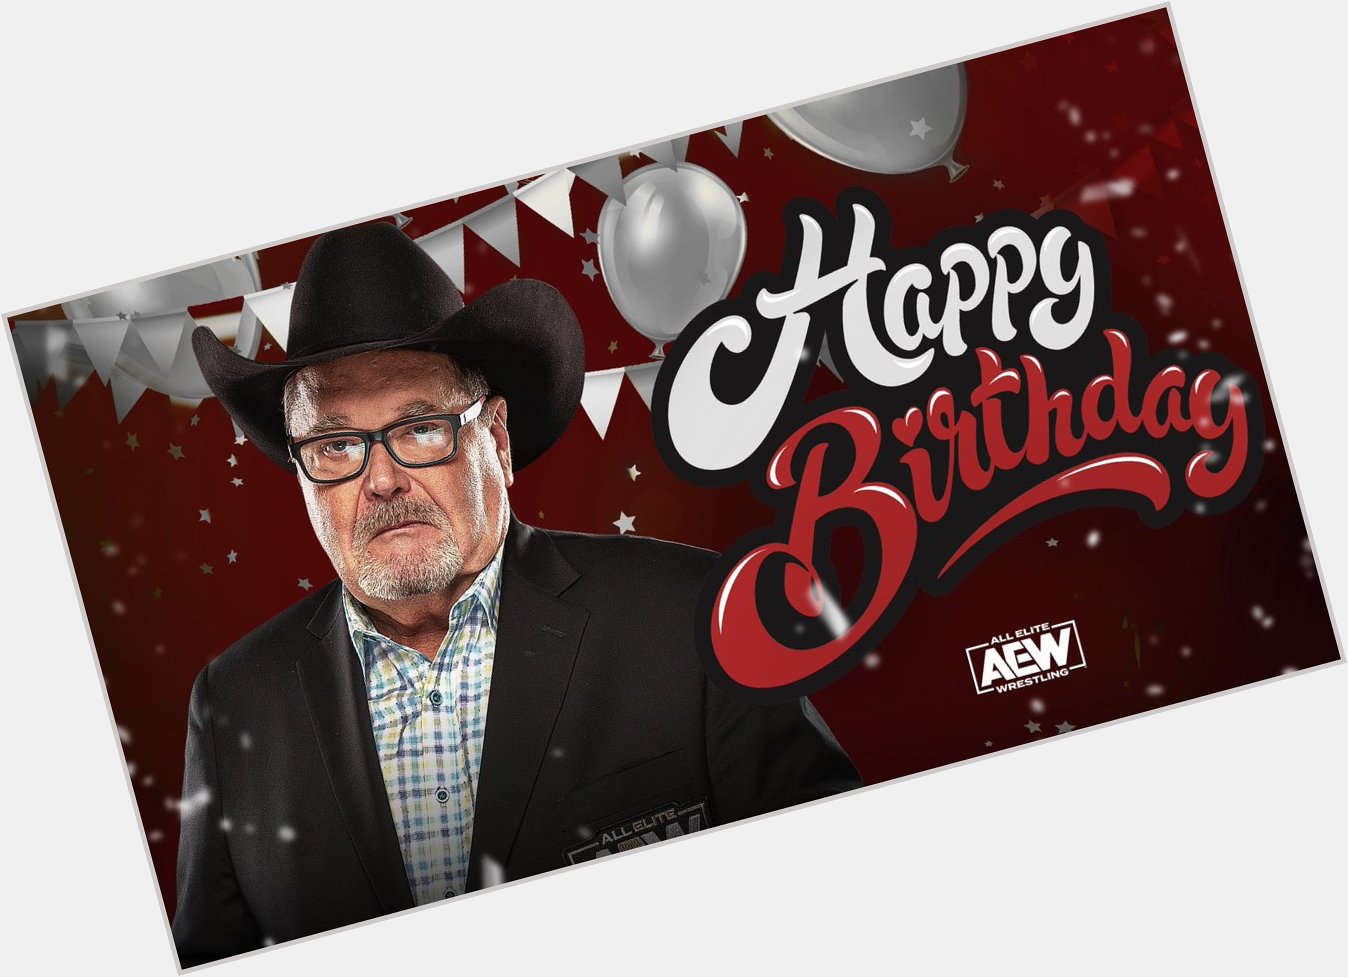 We d like to wish own Jim Ross, The Voice of Wrestling a very Happy Birthday 